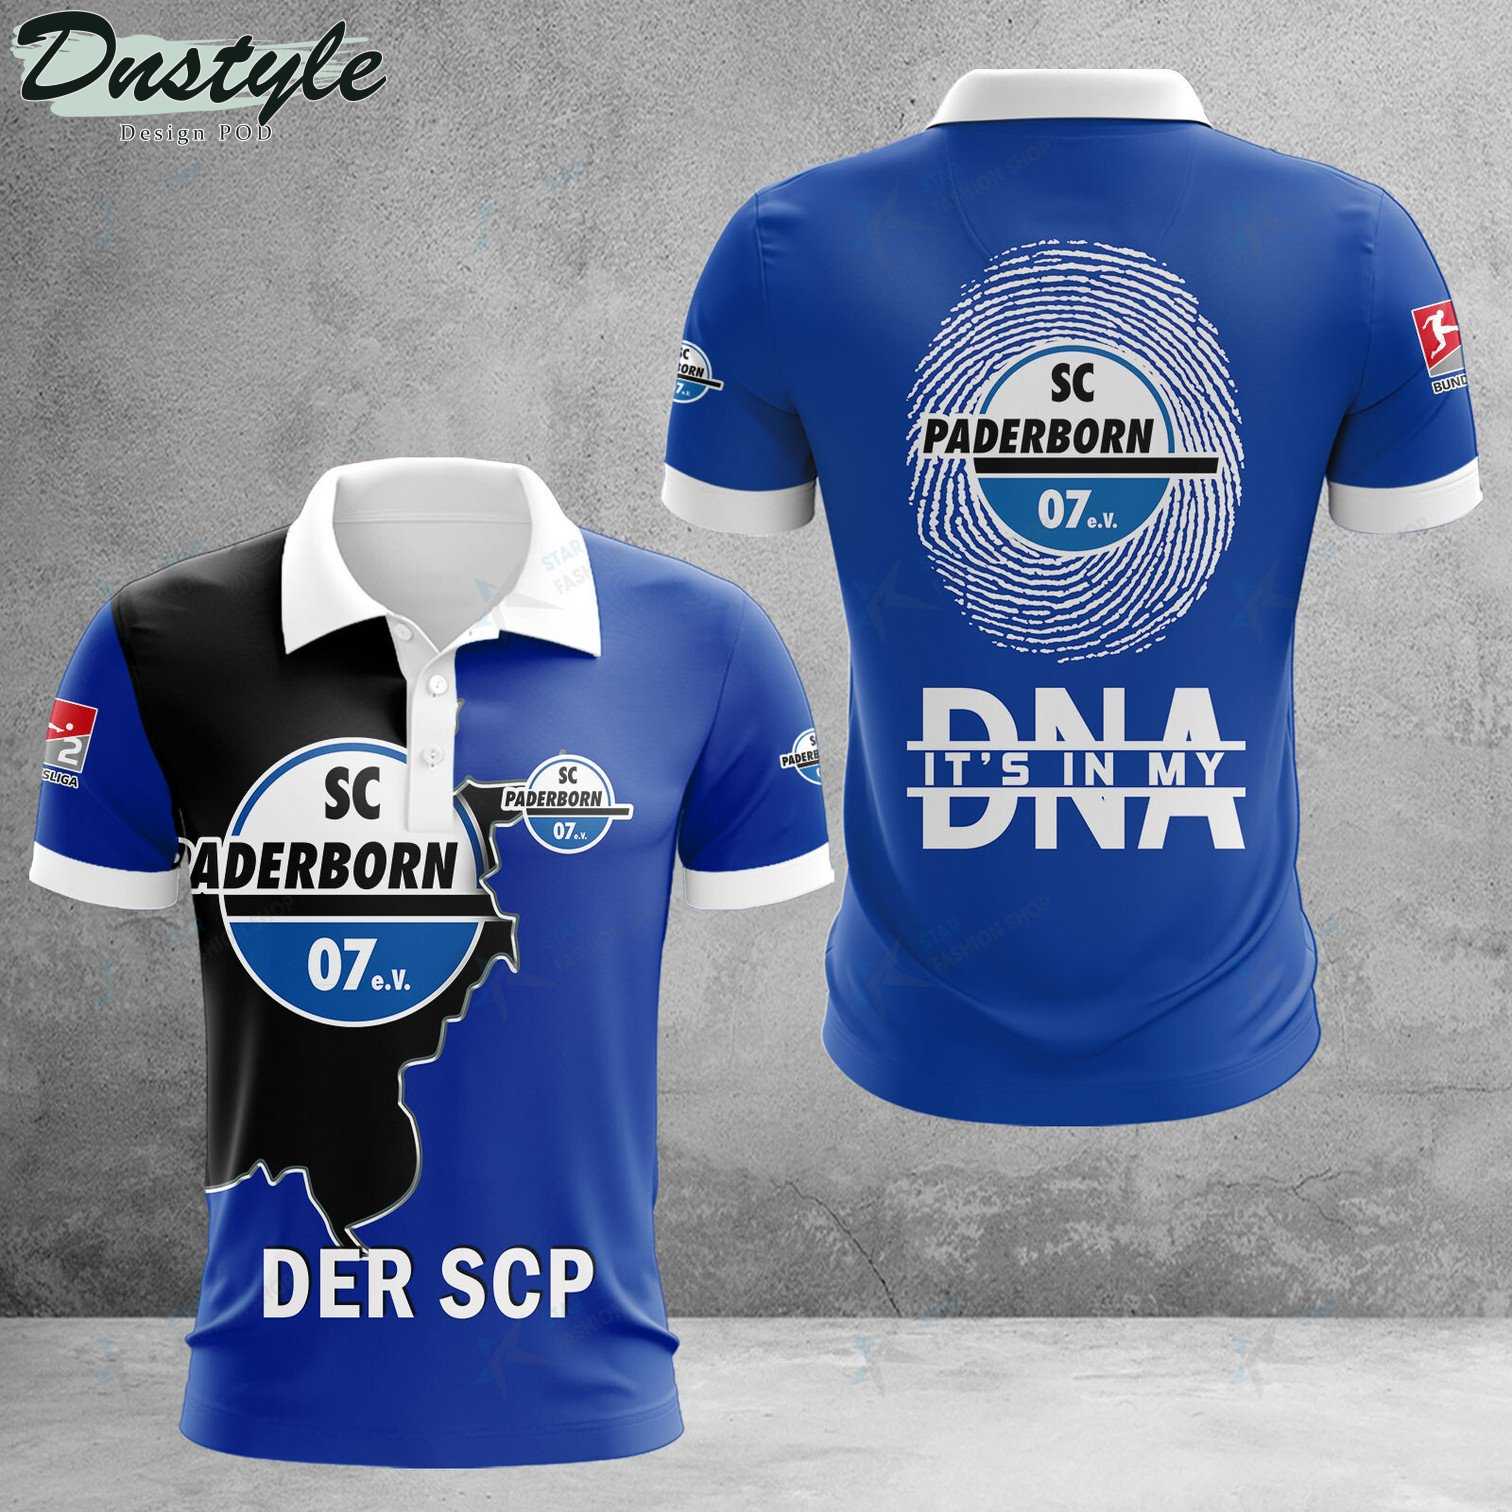 SC Paderborn it's in my DNA polo shirt